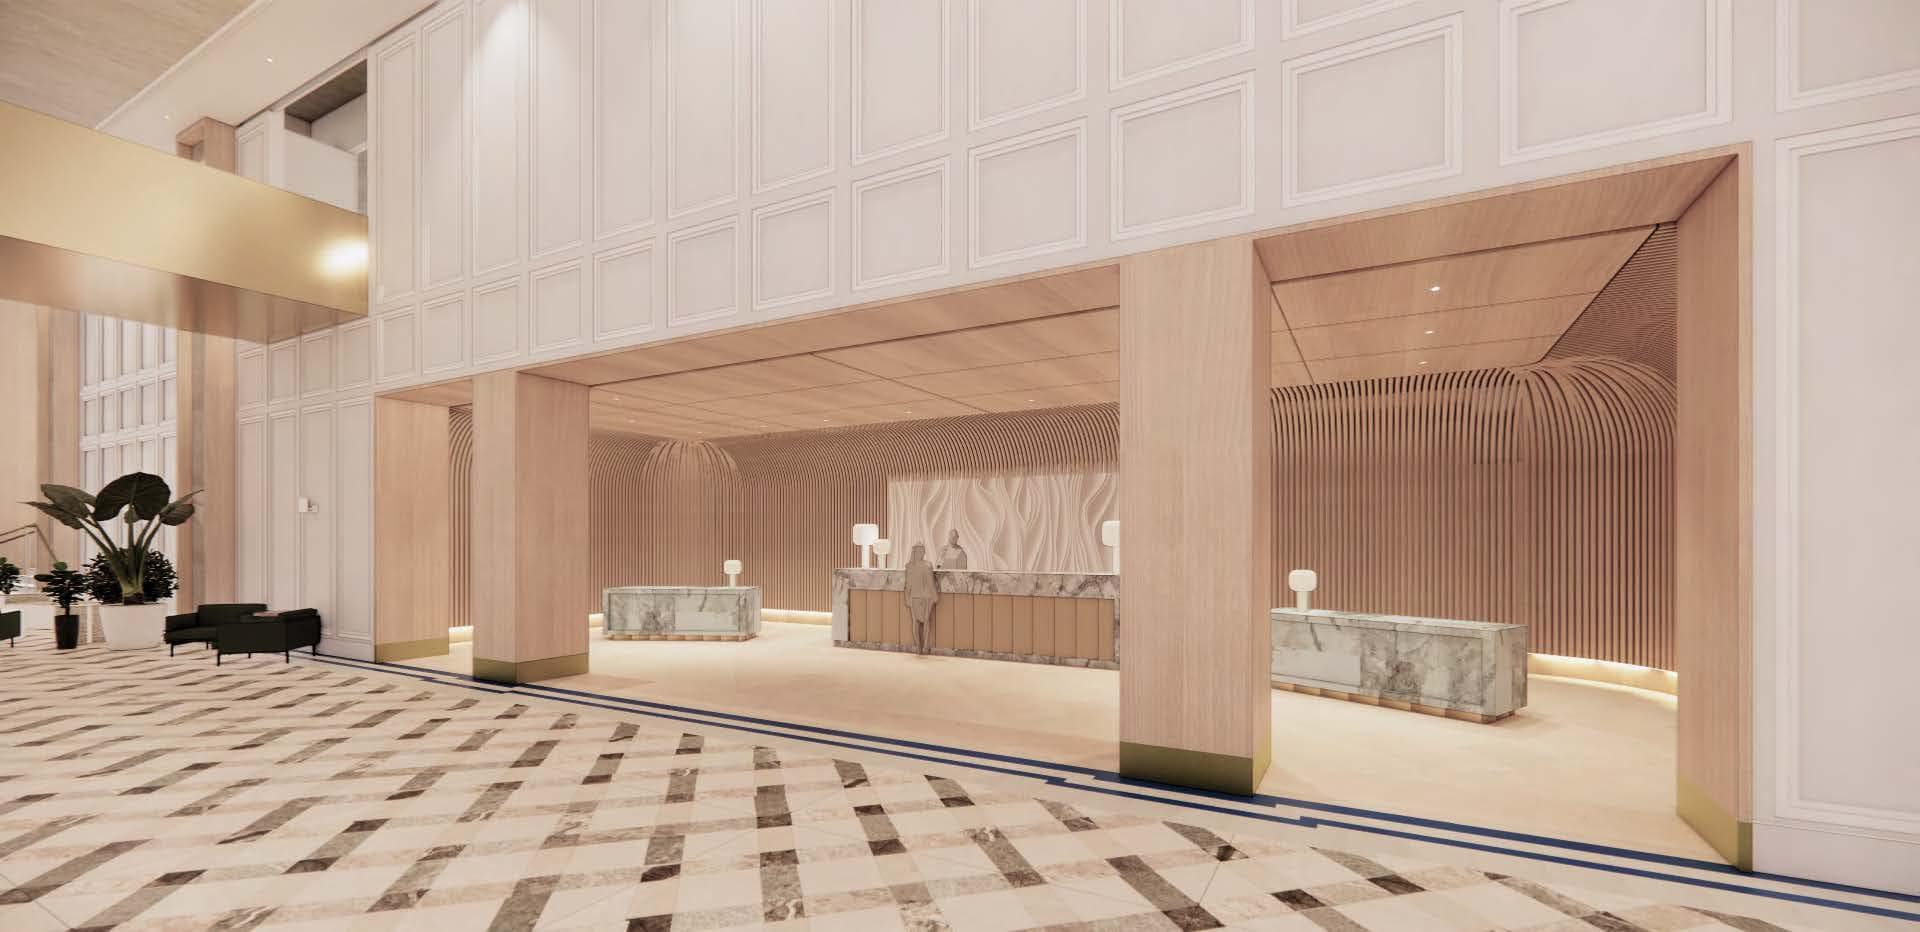 800-Room Grand Hyatt Miami Beach Back On Track, With Completion Expected In 2025